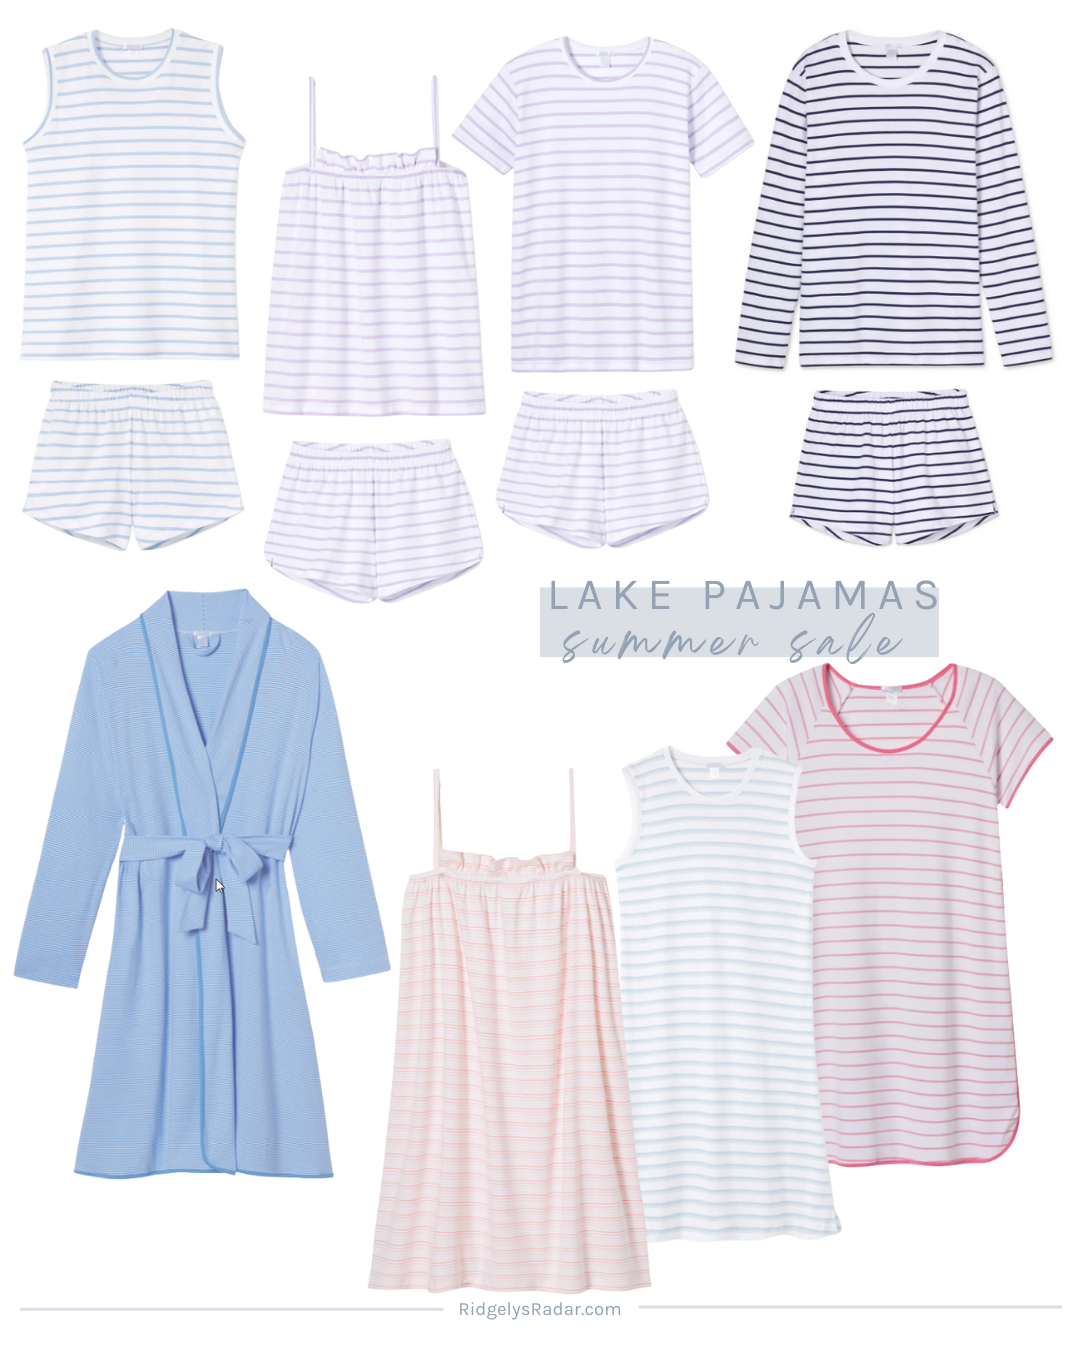 Stock up at the Lake Pajamas Summer sale with super soft pima cotton sets for babies, kids, maternity, ladies and men. They are the BEST!